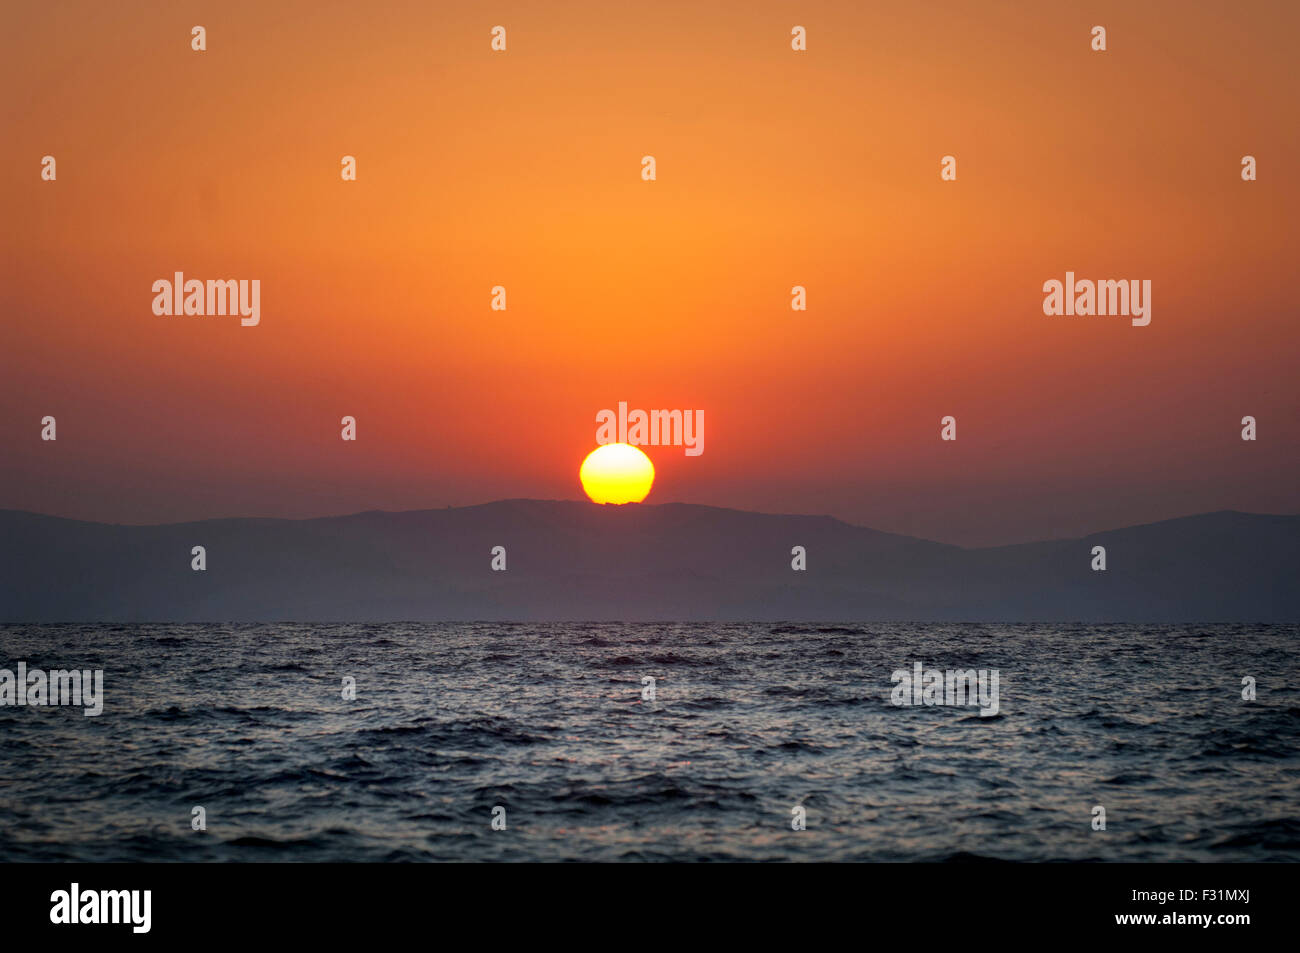 Sun rise over western Turkey. Photographed from the Island of Lesbos, Greece. Stock Photo